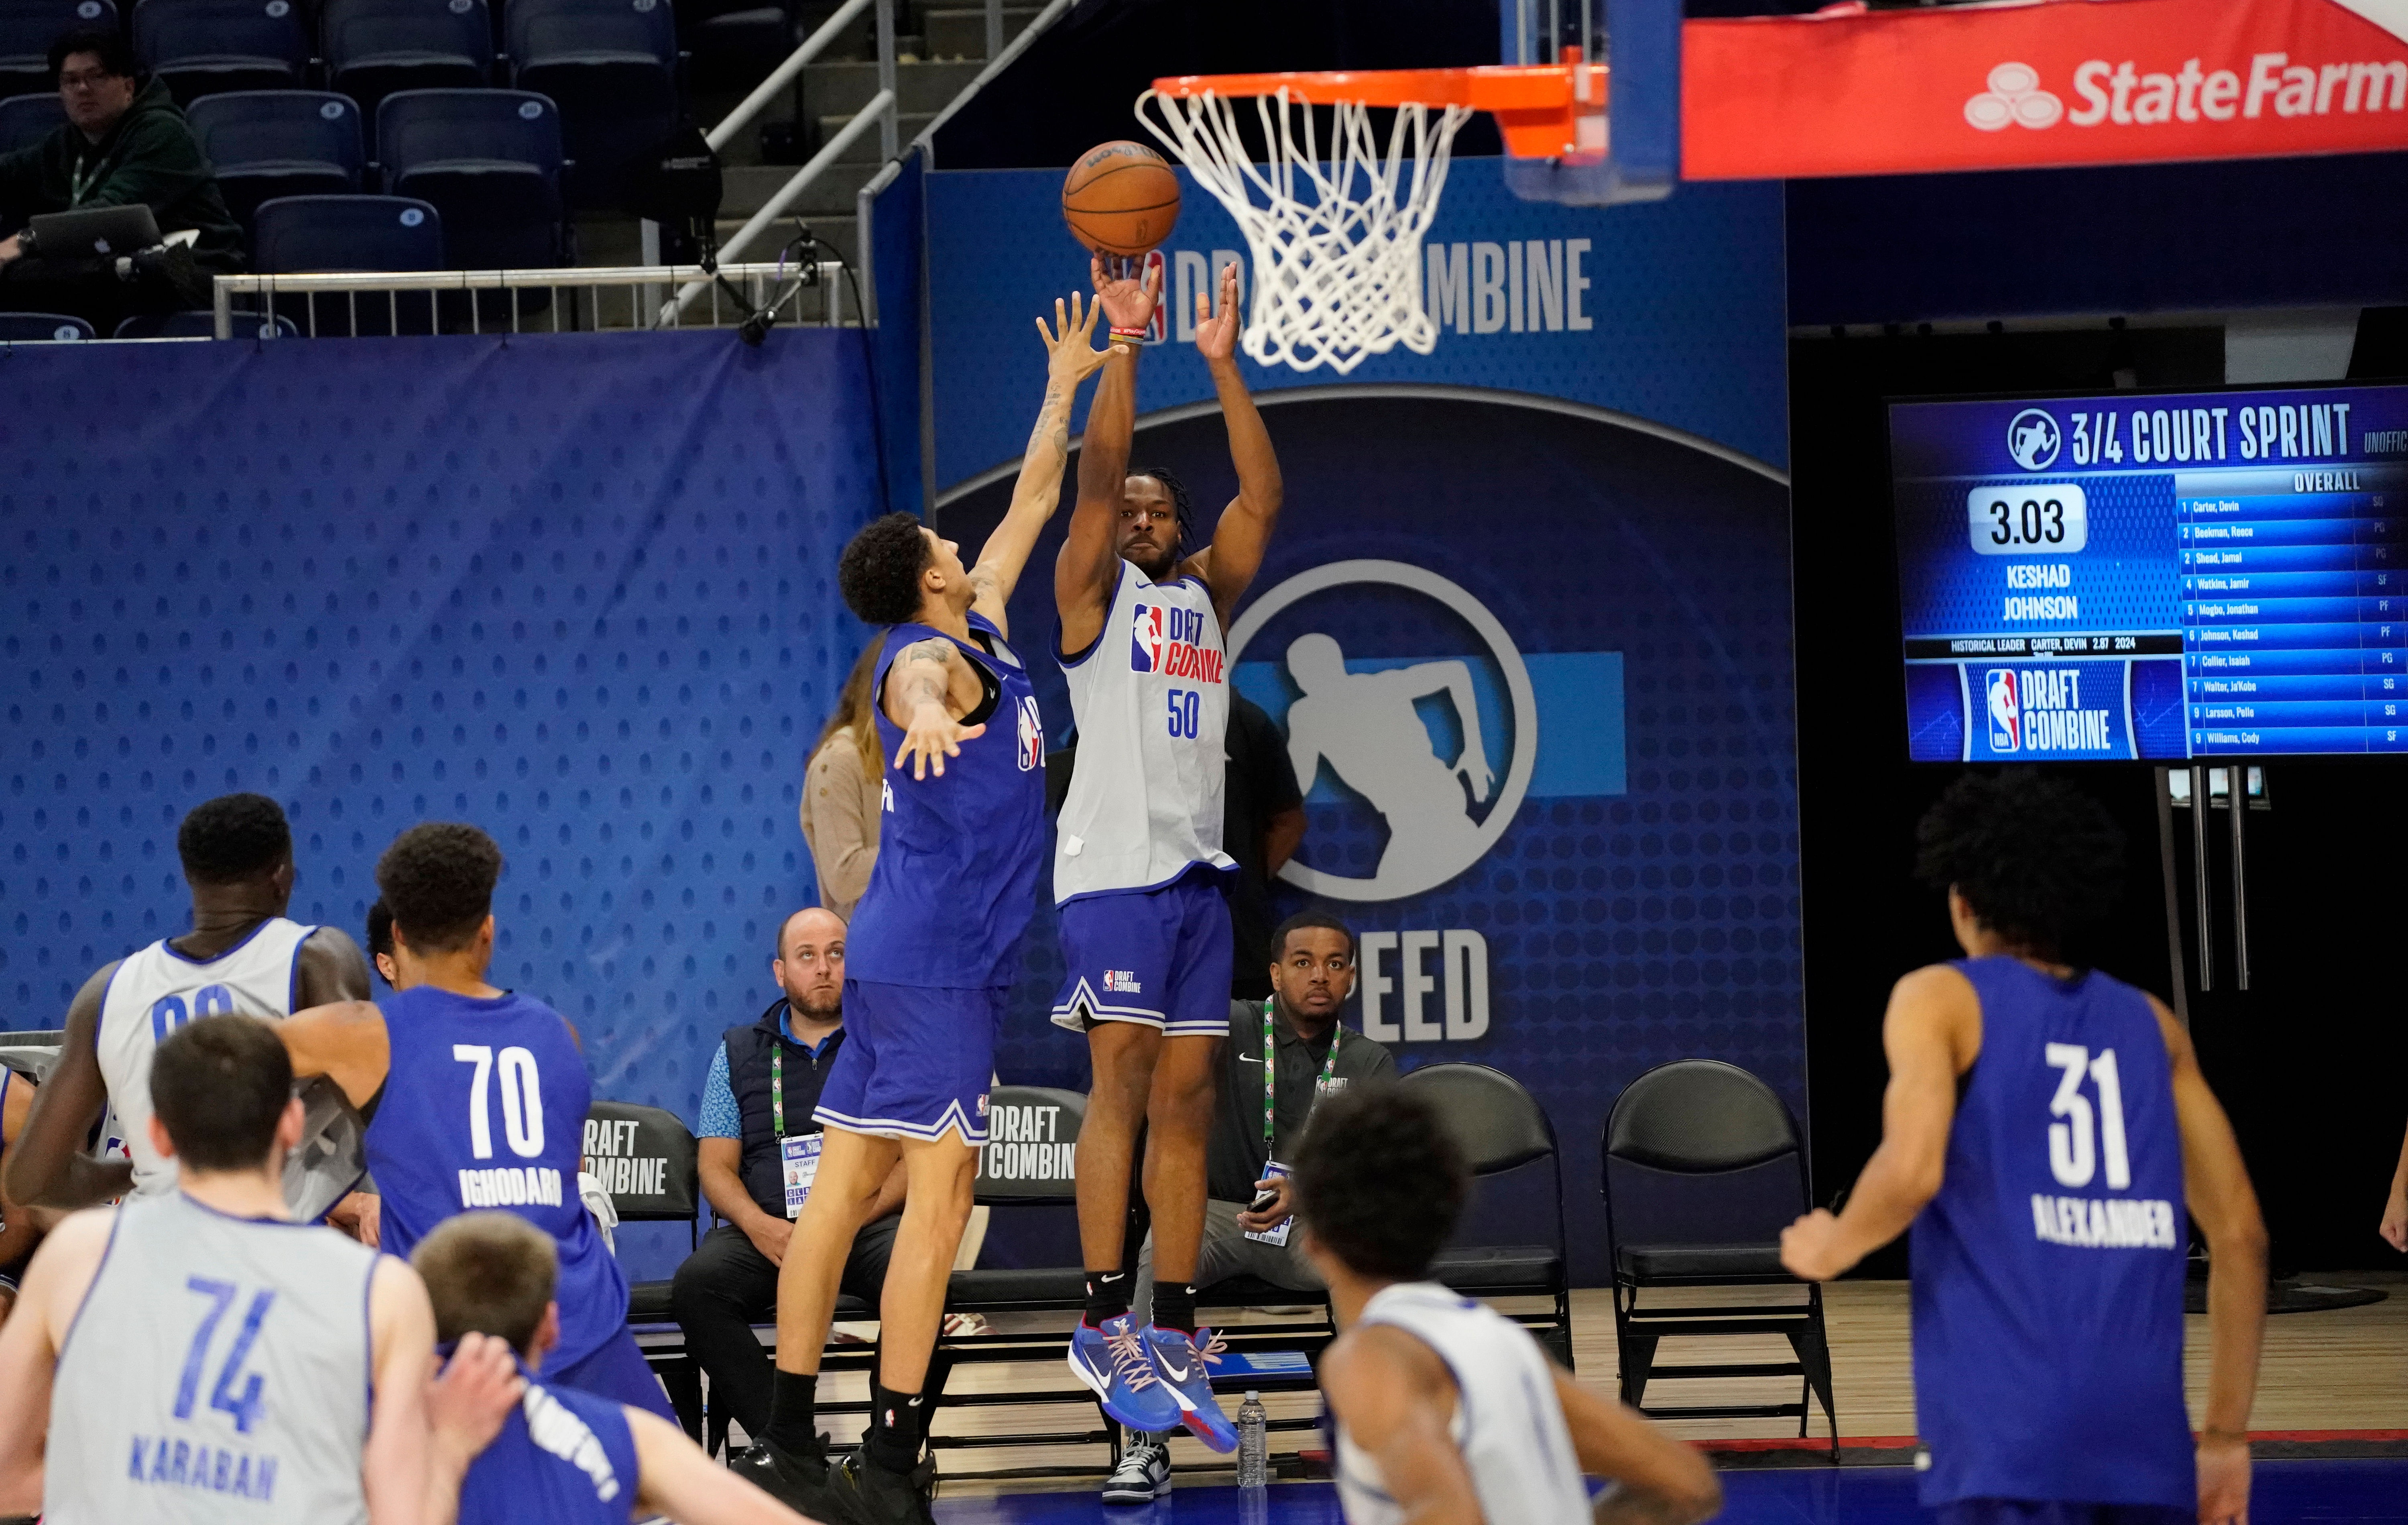 Bronny James finished with 13 points in the second day of NBA Draft Combine scrimmage.